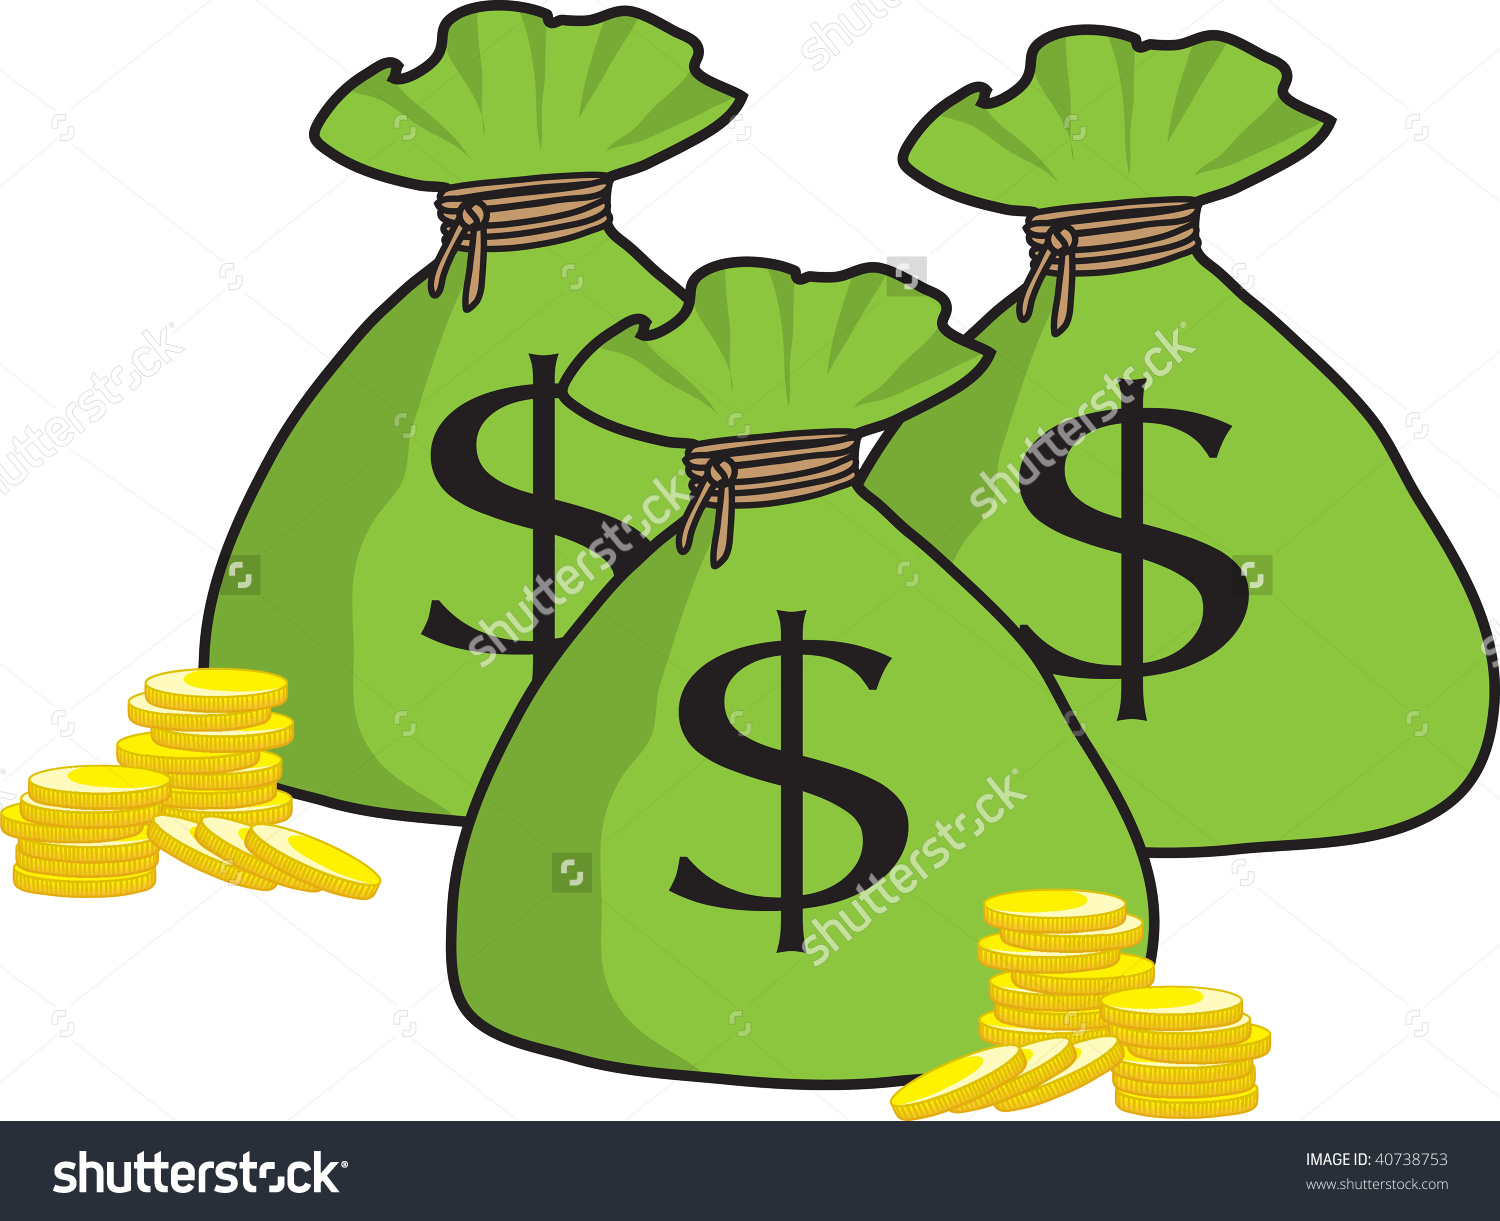 clipart illustration of a bunch of money bags with golden coins